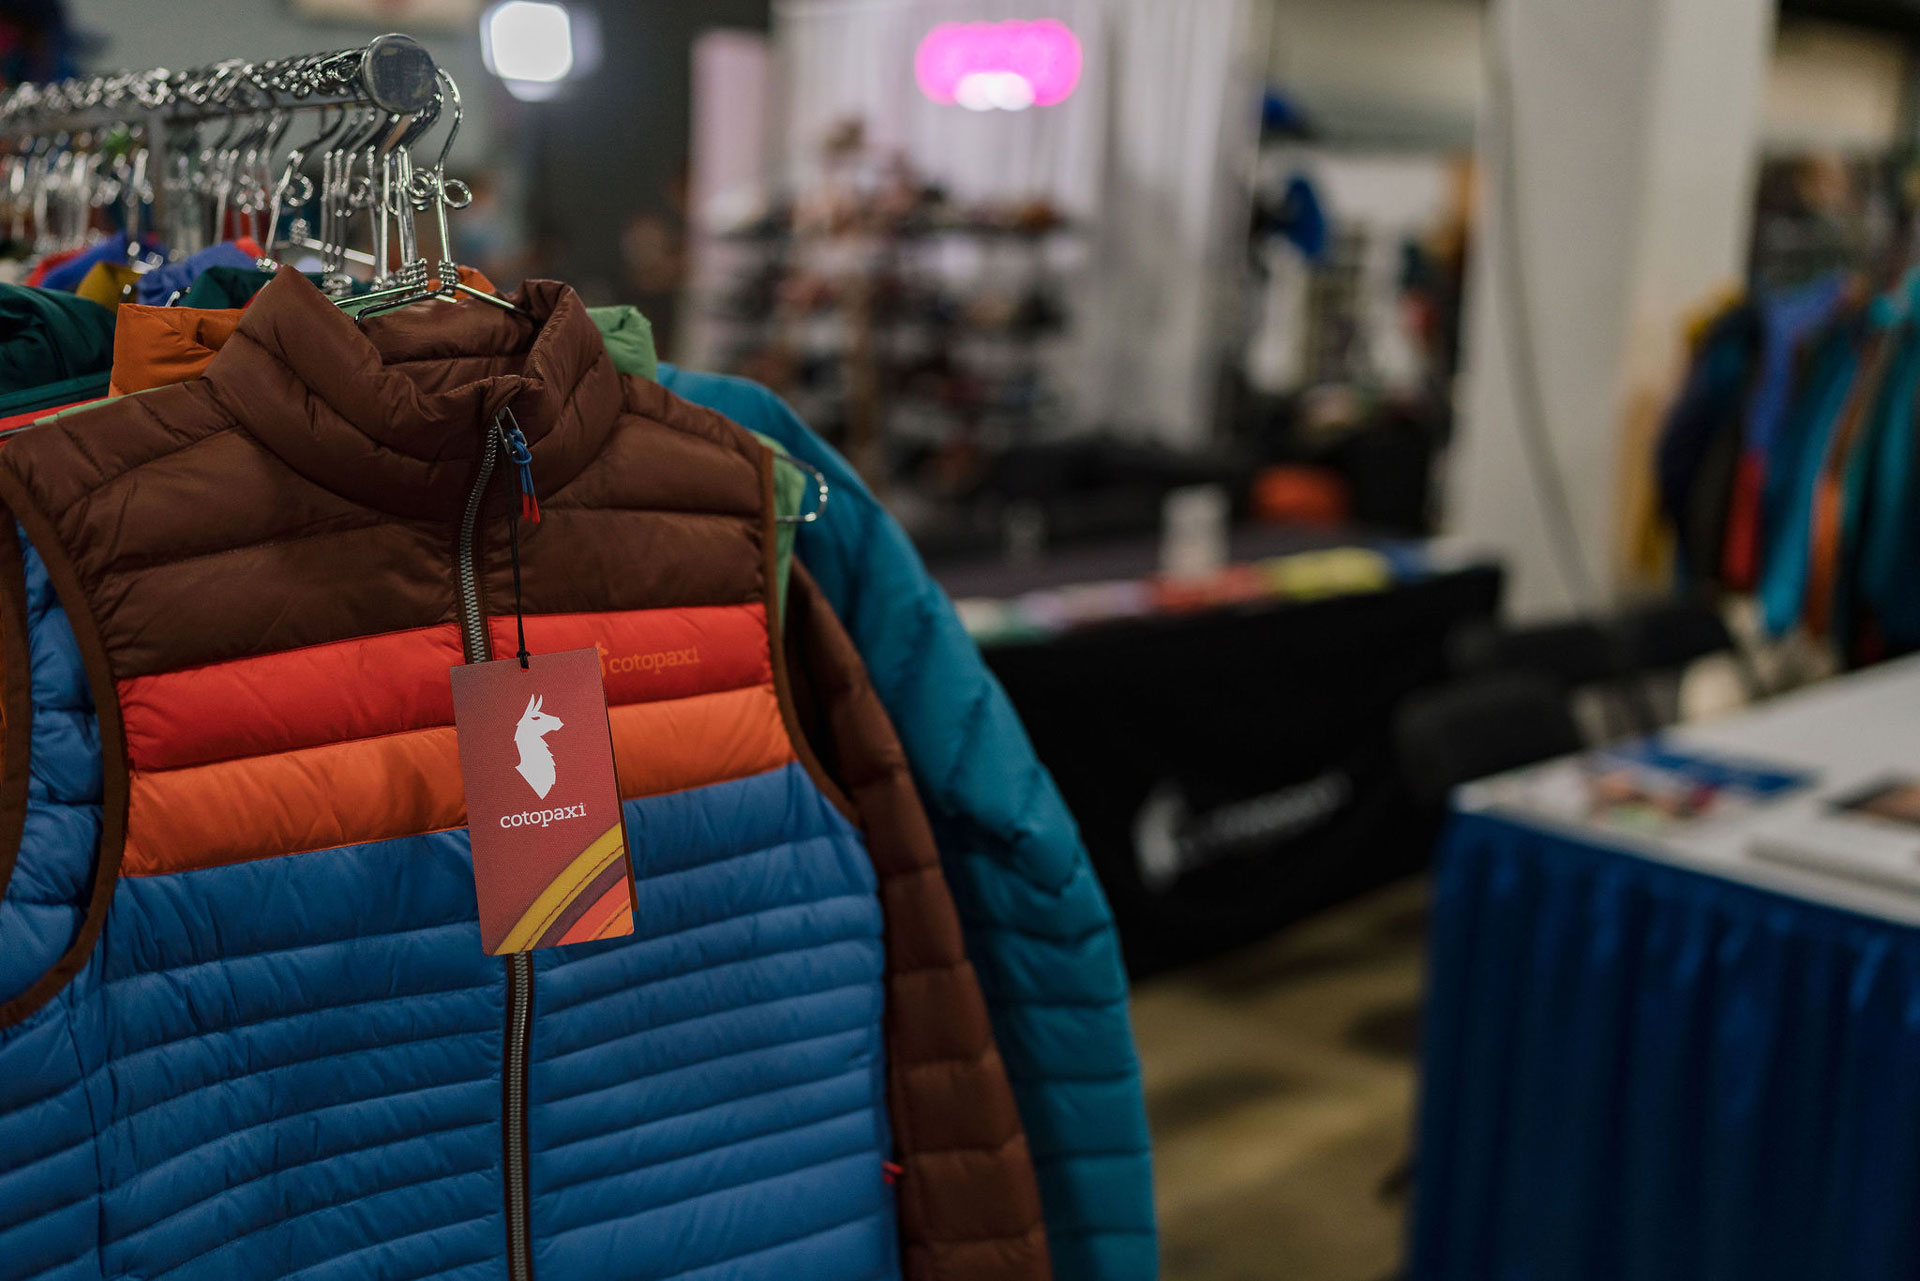 Cotopaxi jacket hanging on a rack